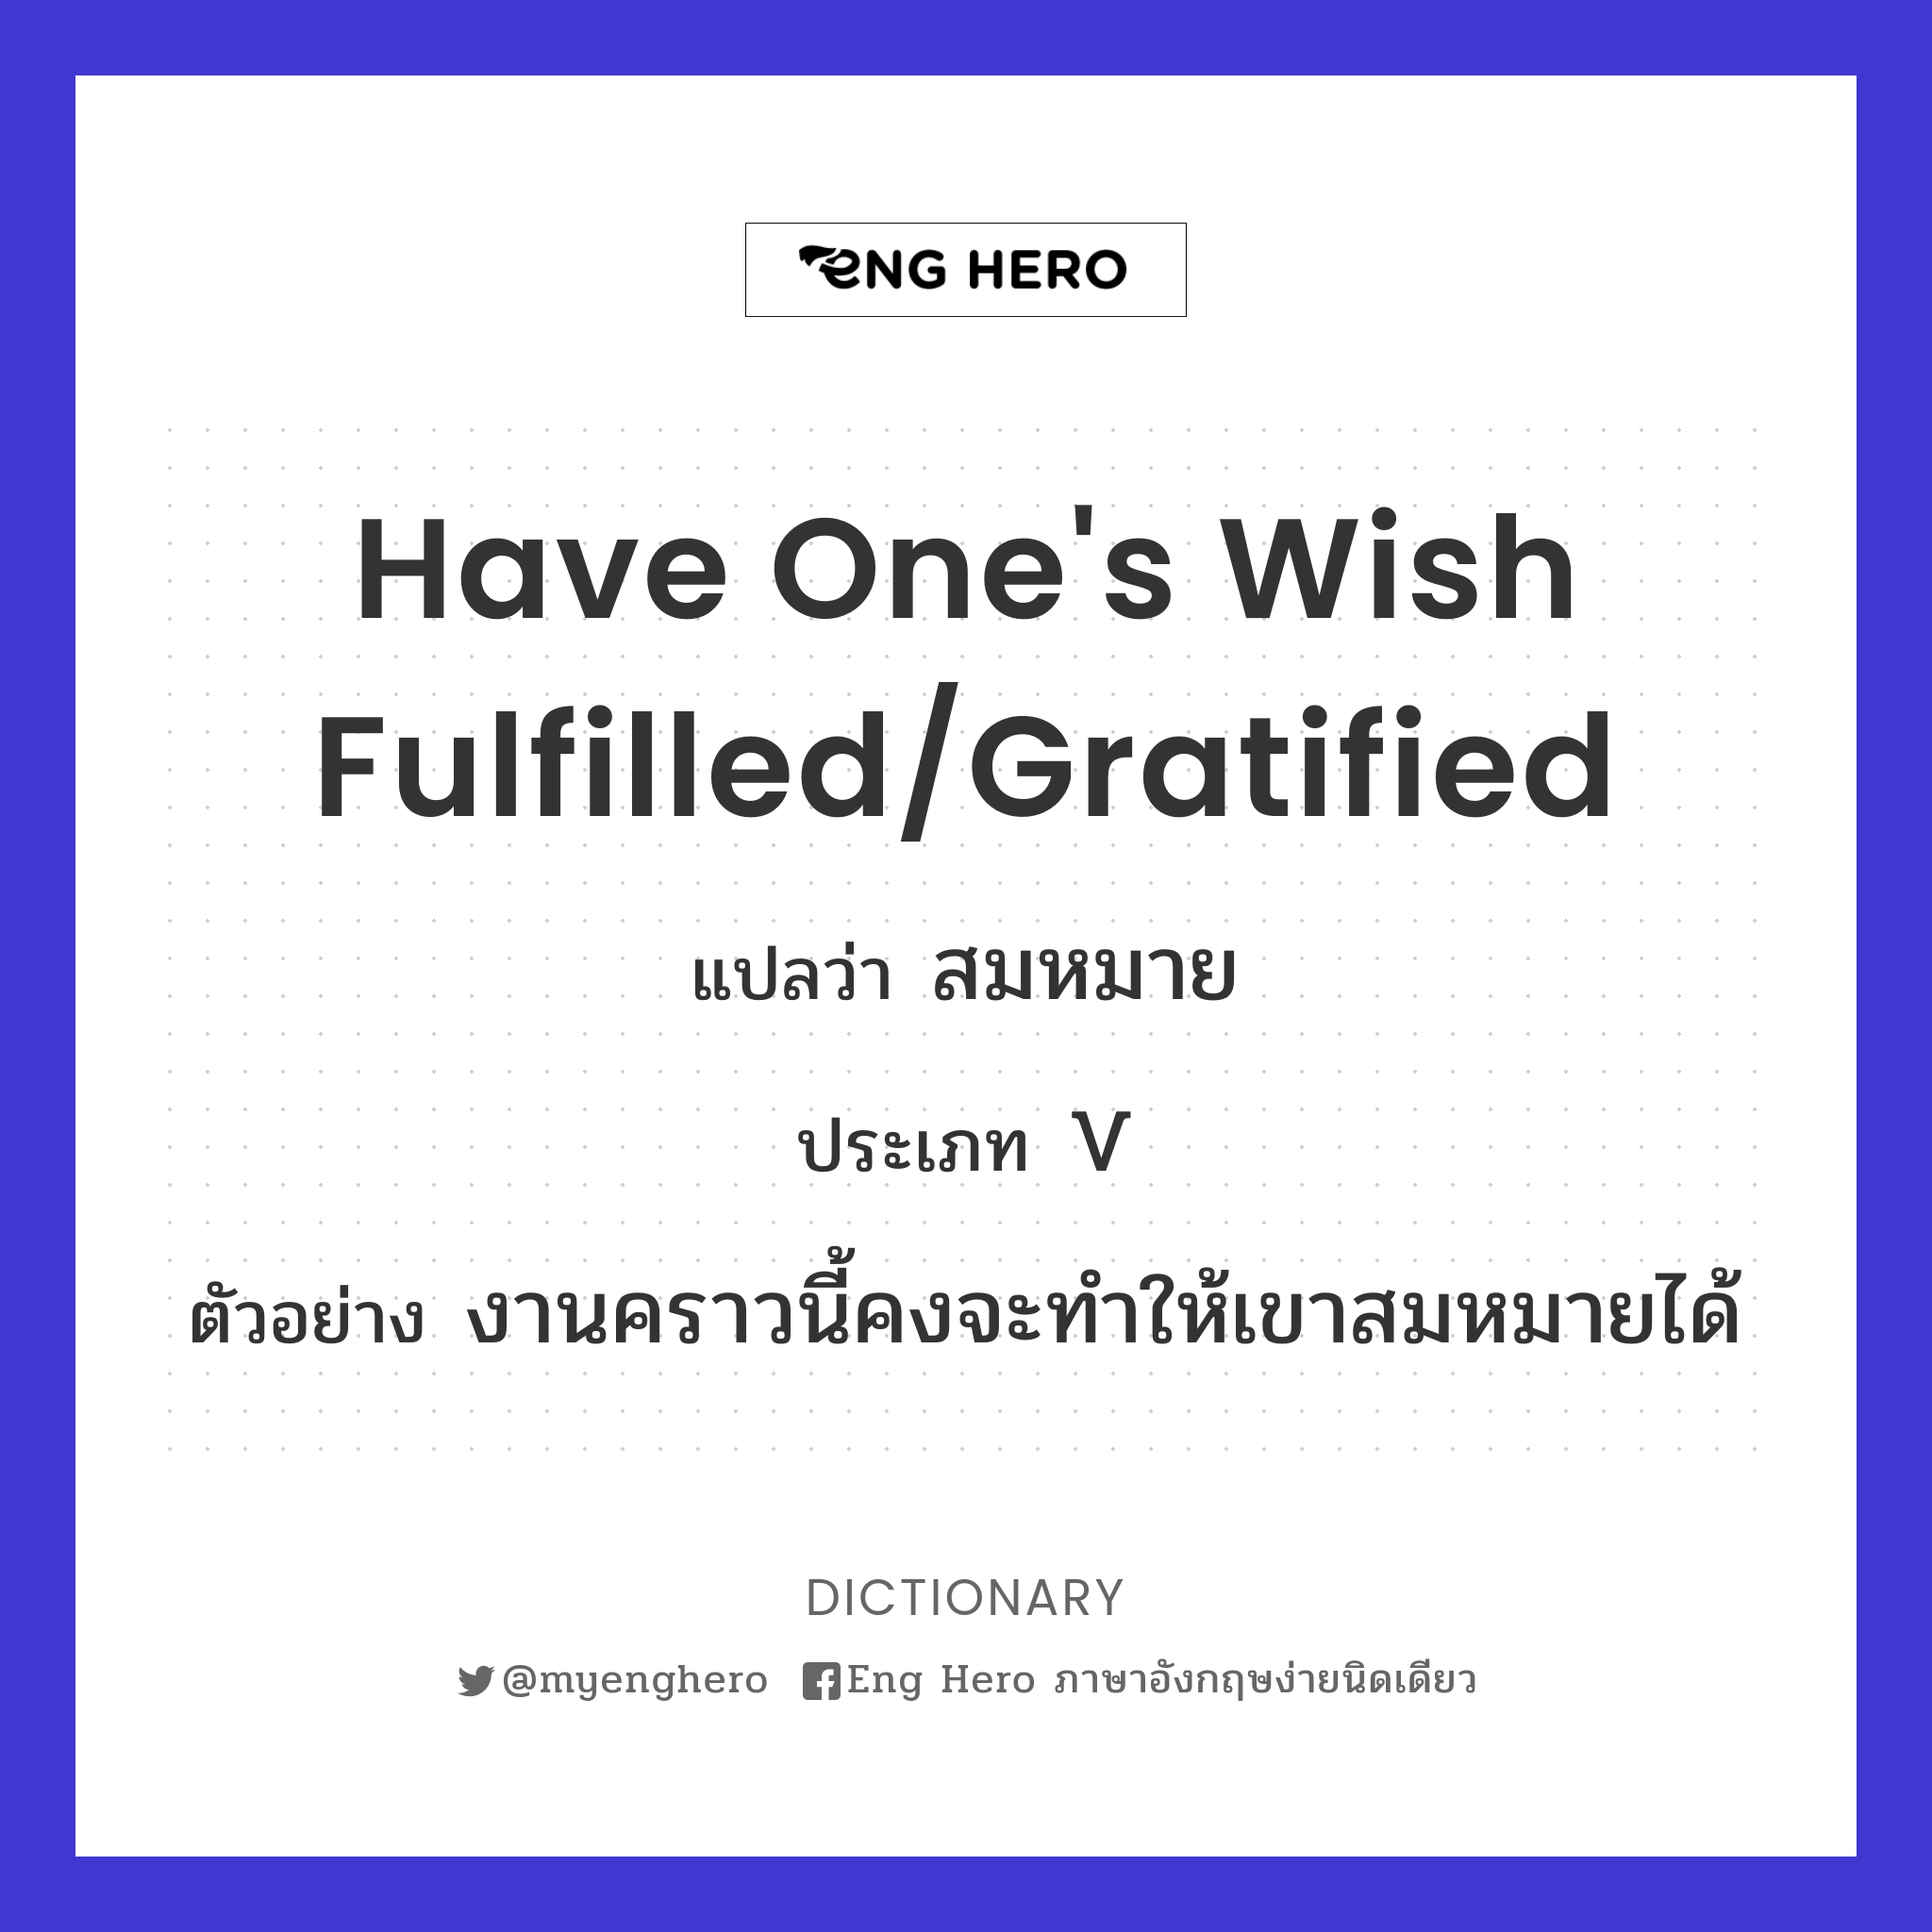 have one's wish fulfilled/gratified